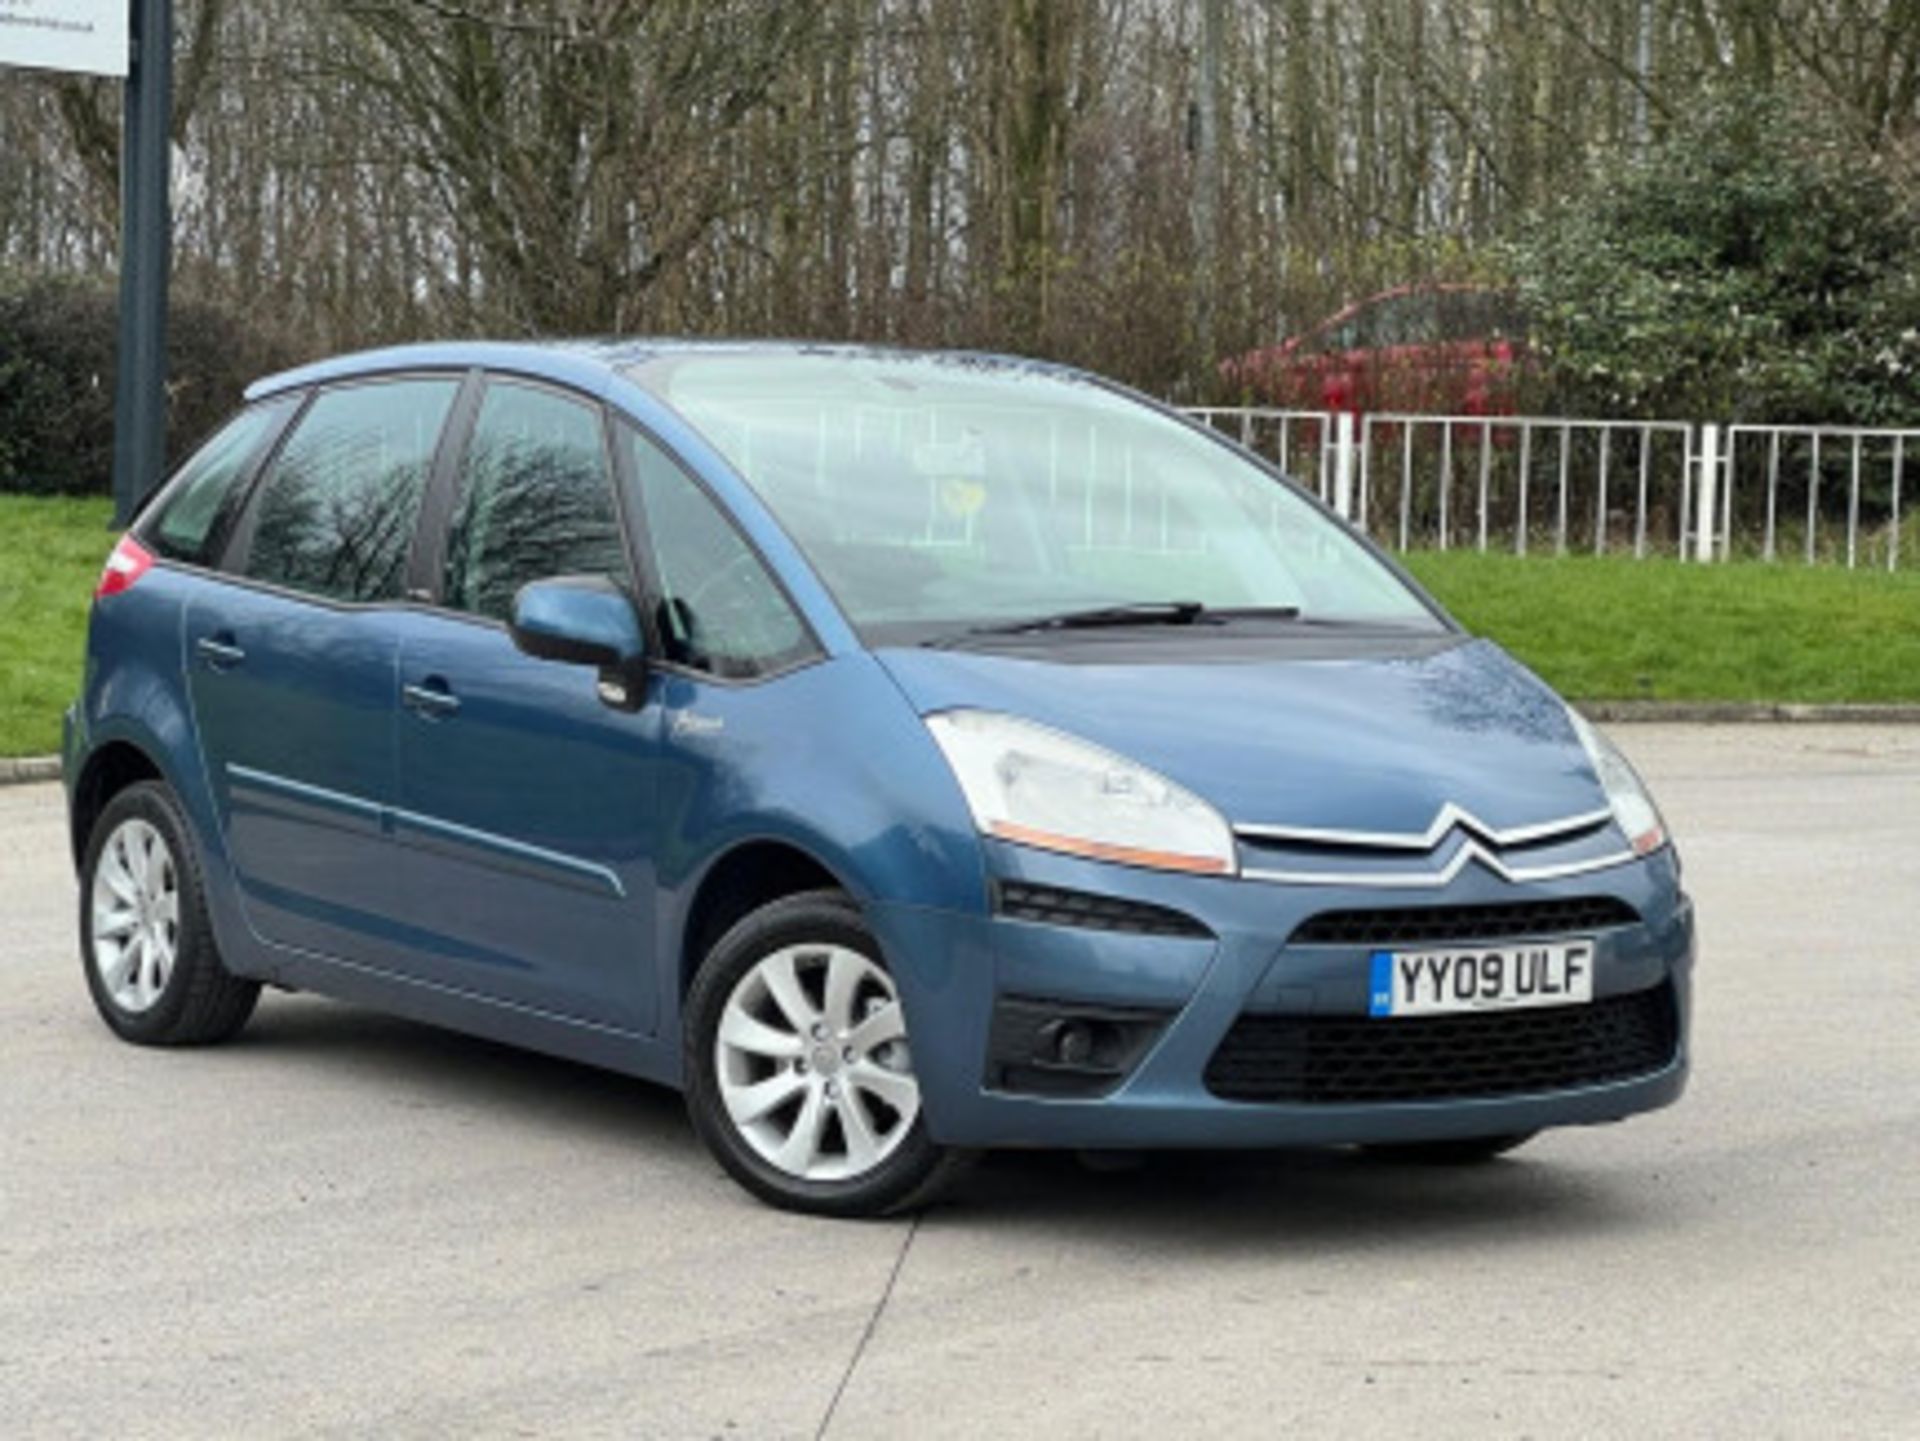 2009 CITROEN C4 PICASSO 1.6 HDI VTR+ EGS6 5DR >>--NO VAT ON HAMMER--<< - Image 53 of 123